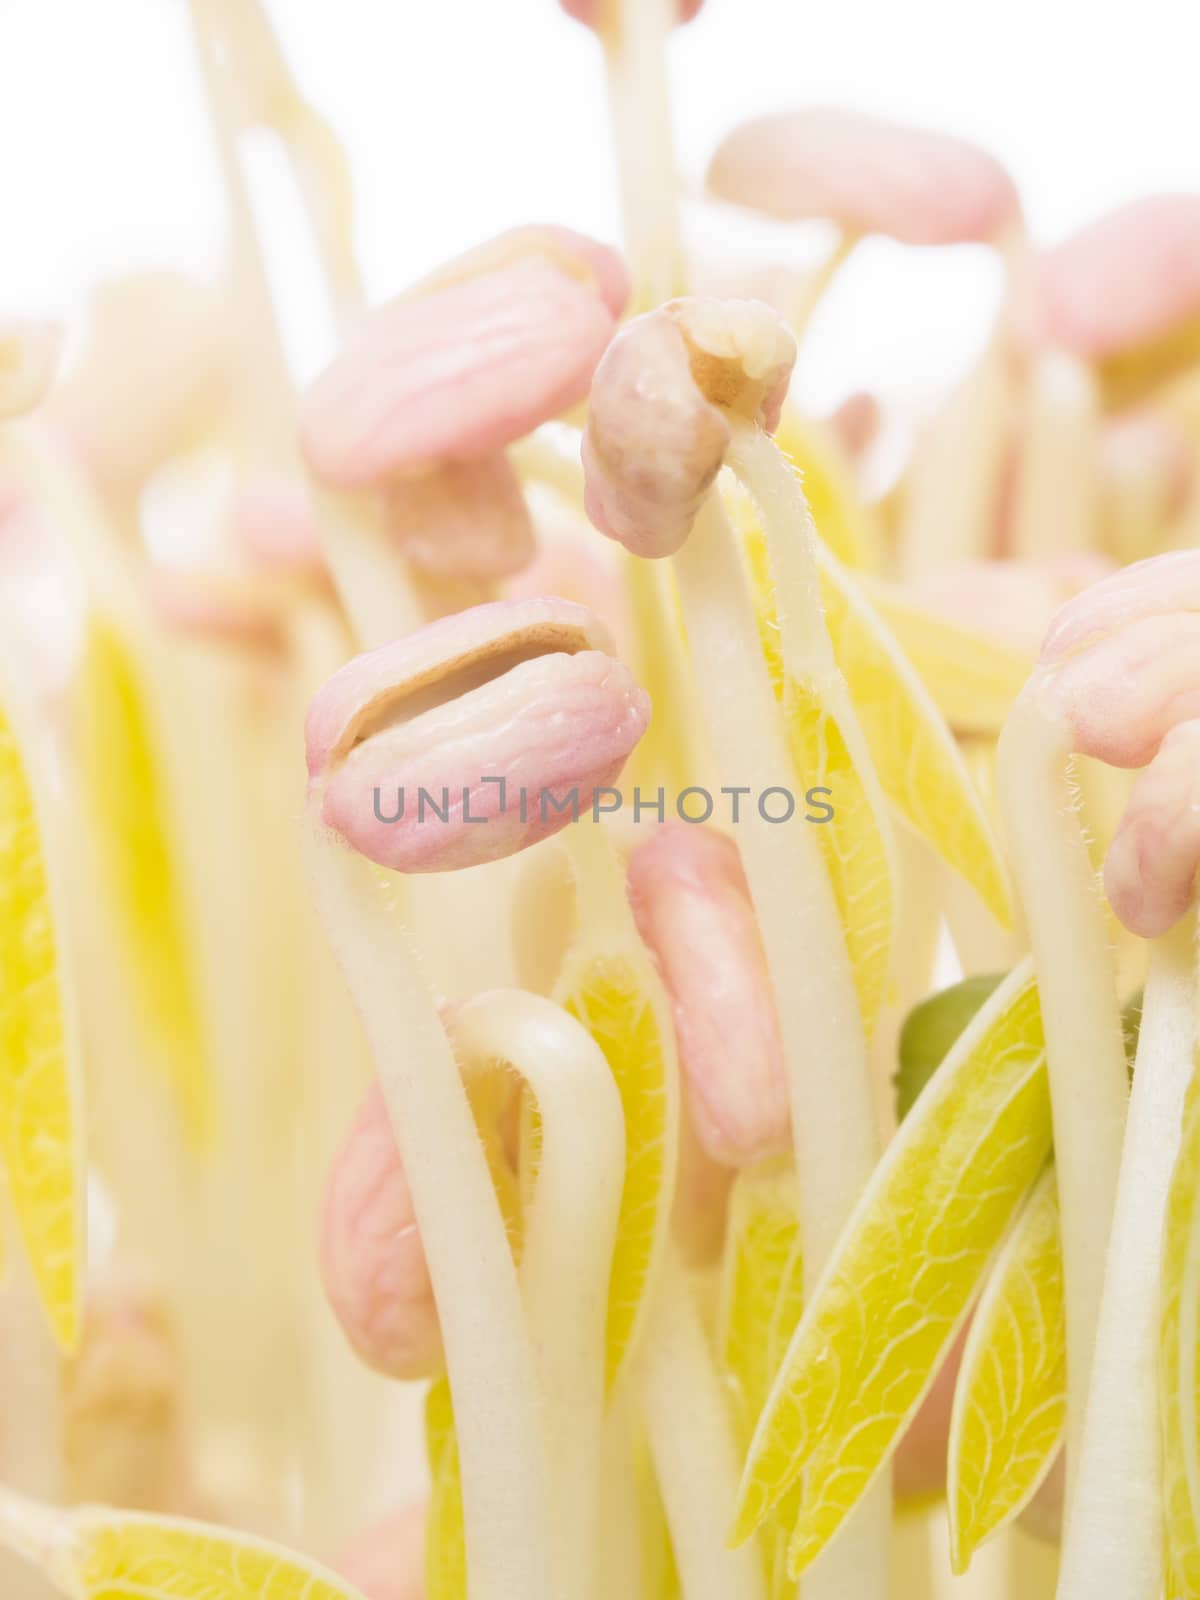 bean sprout by zkruger